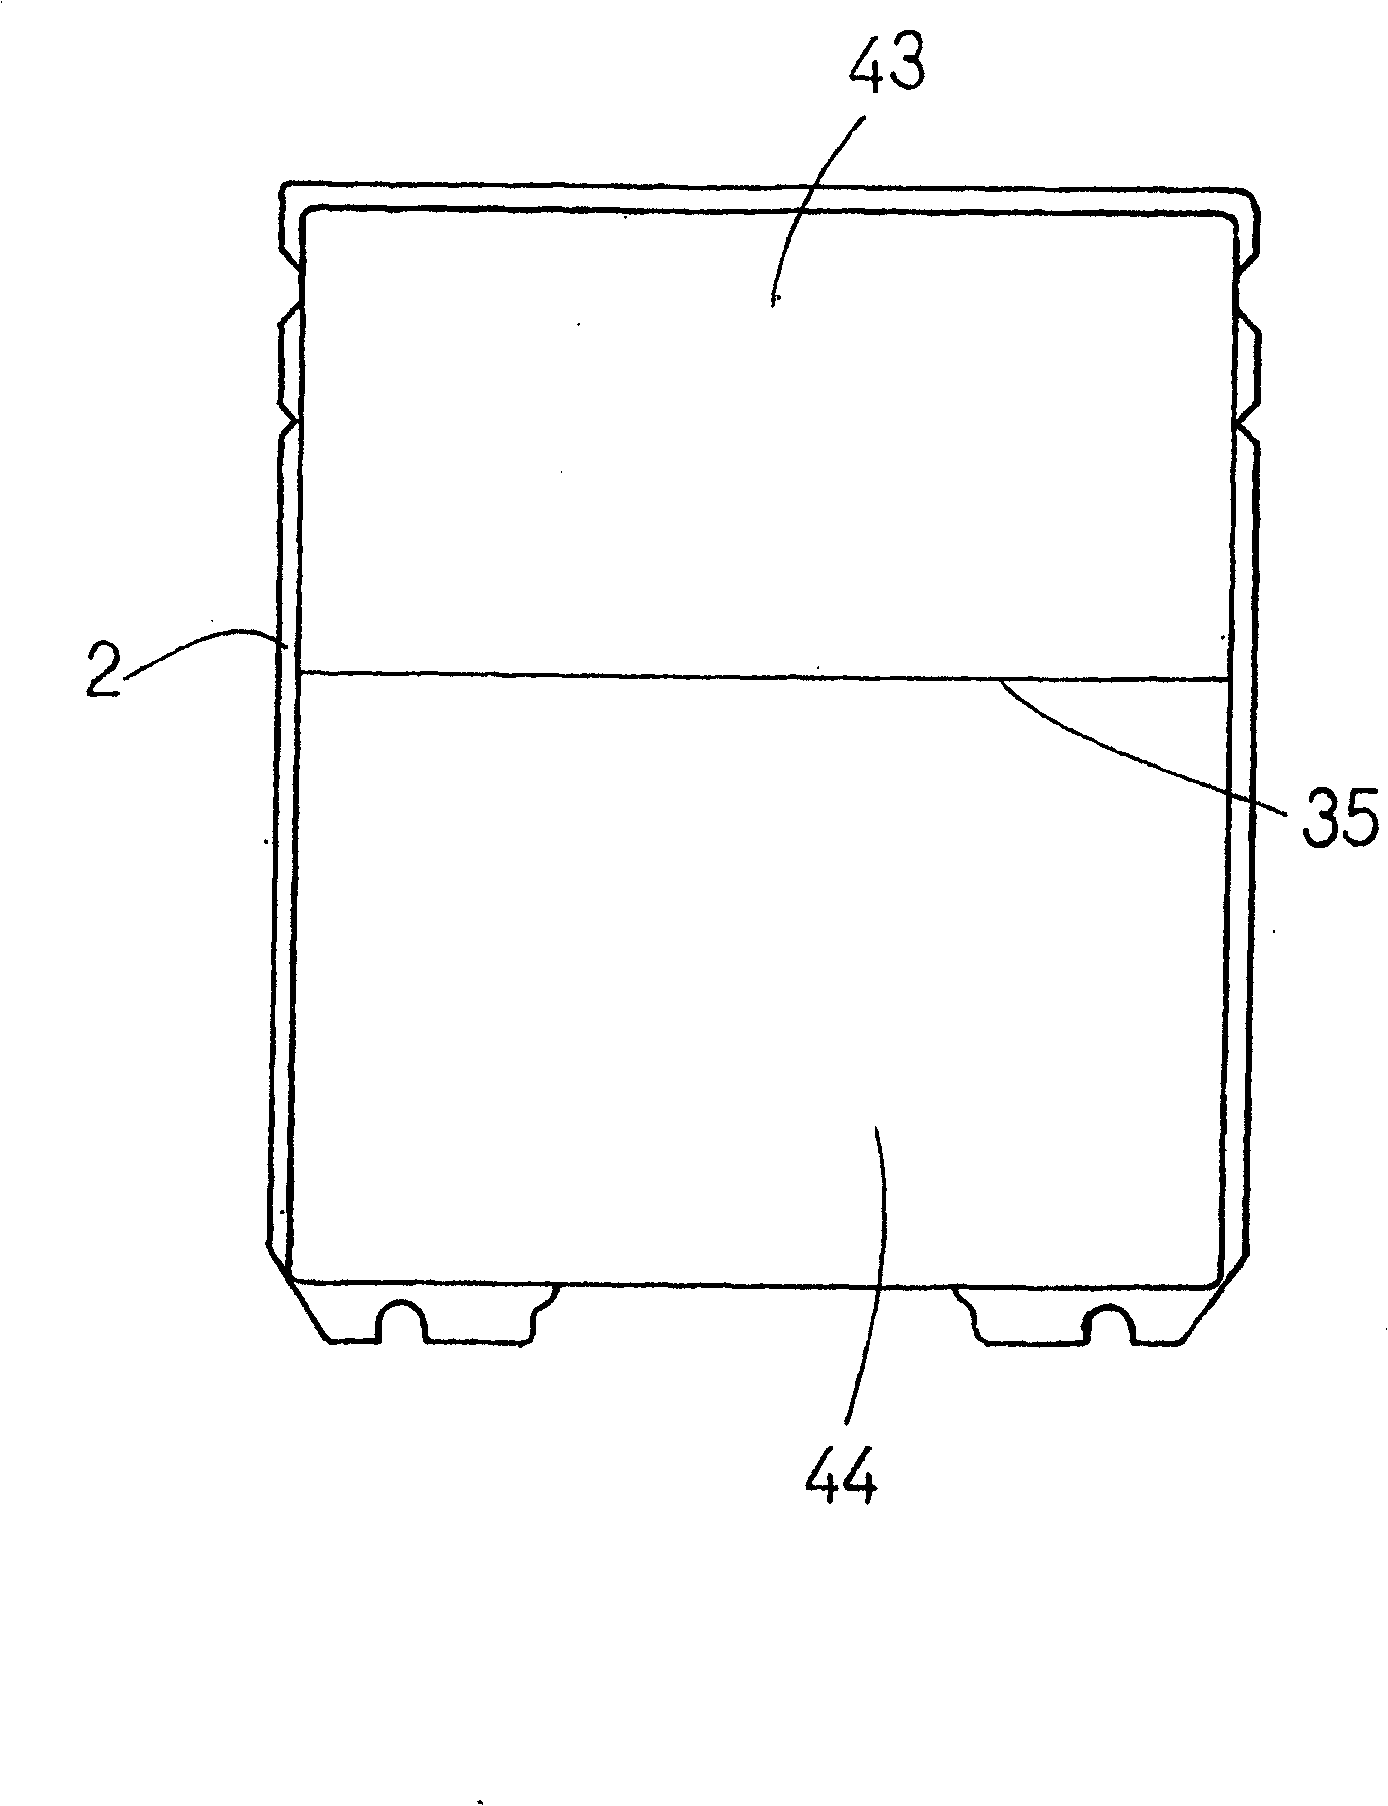 Dust-collecting filter for electrical cleaner